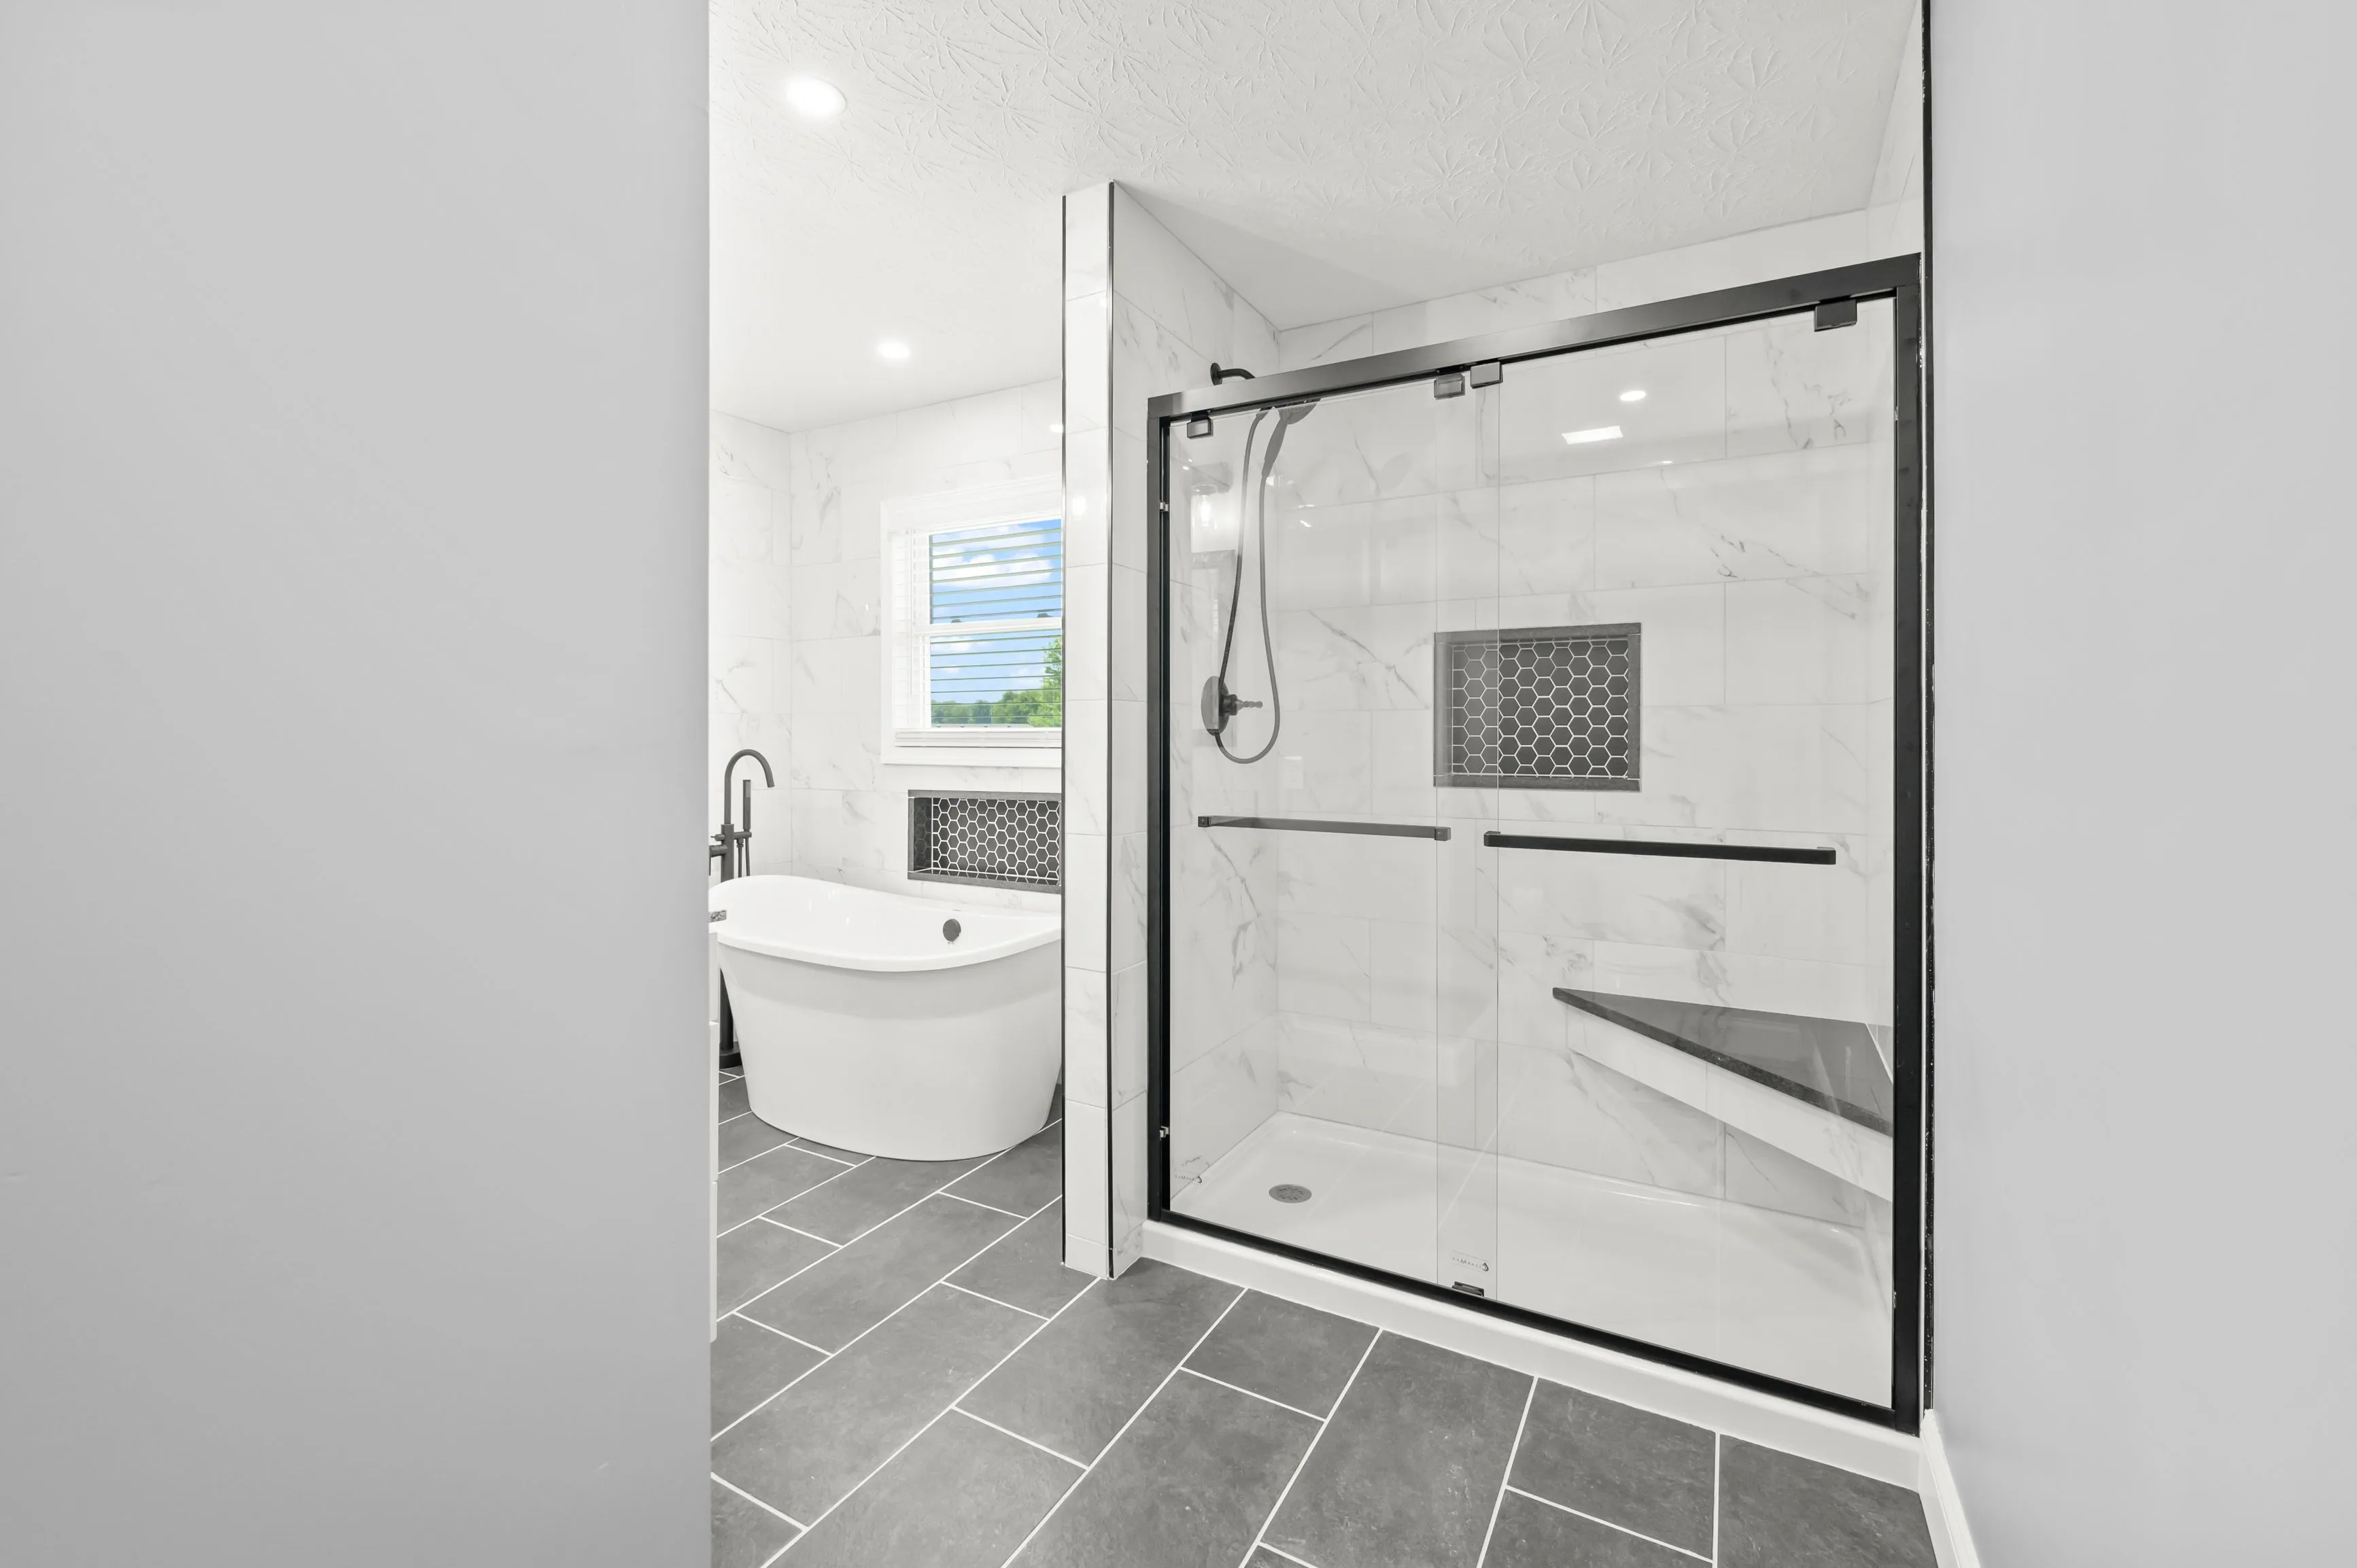 Modern bathroom interior with a freestanding tub, walk-in shower with glass doors, and a window allowing natural light.